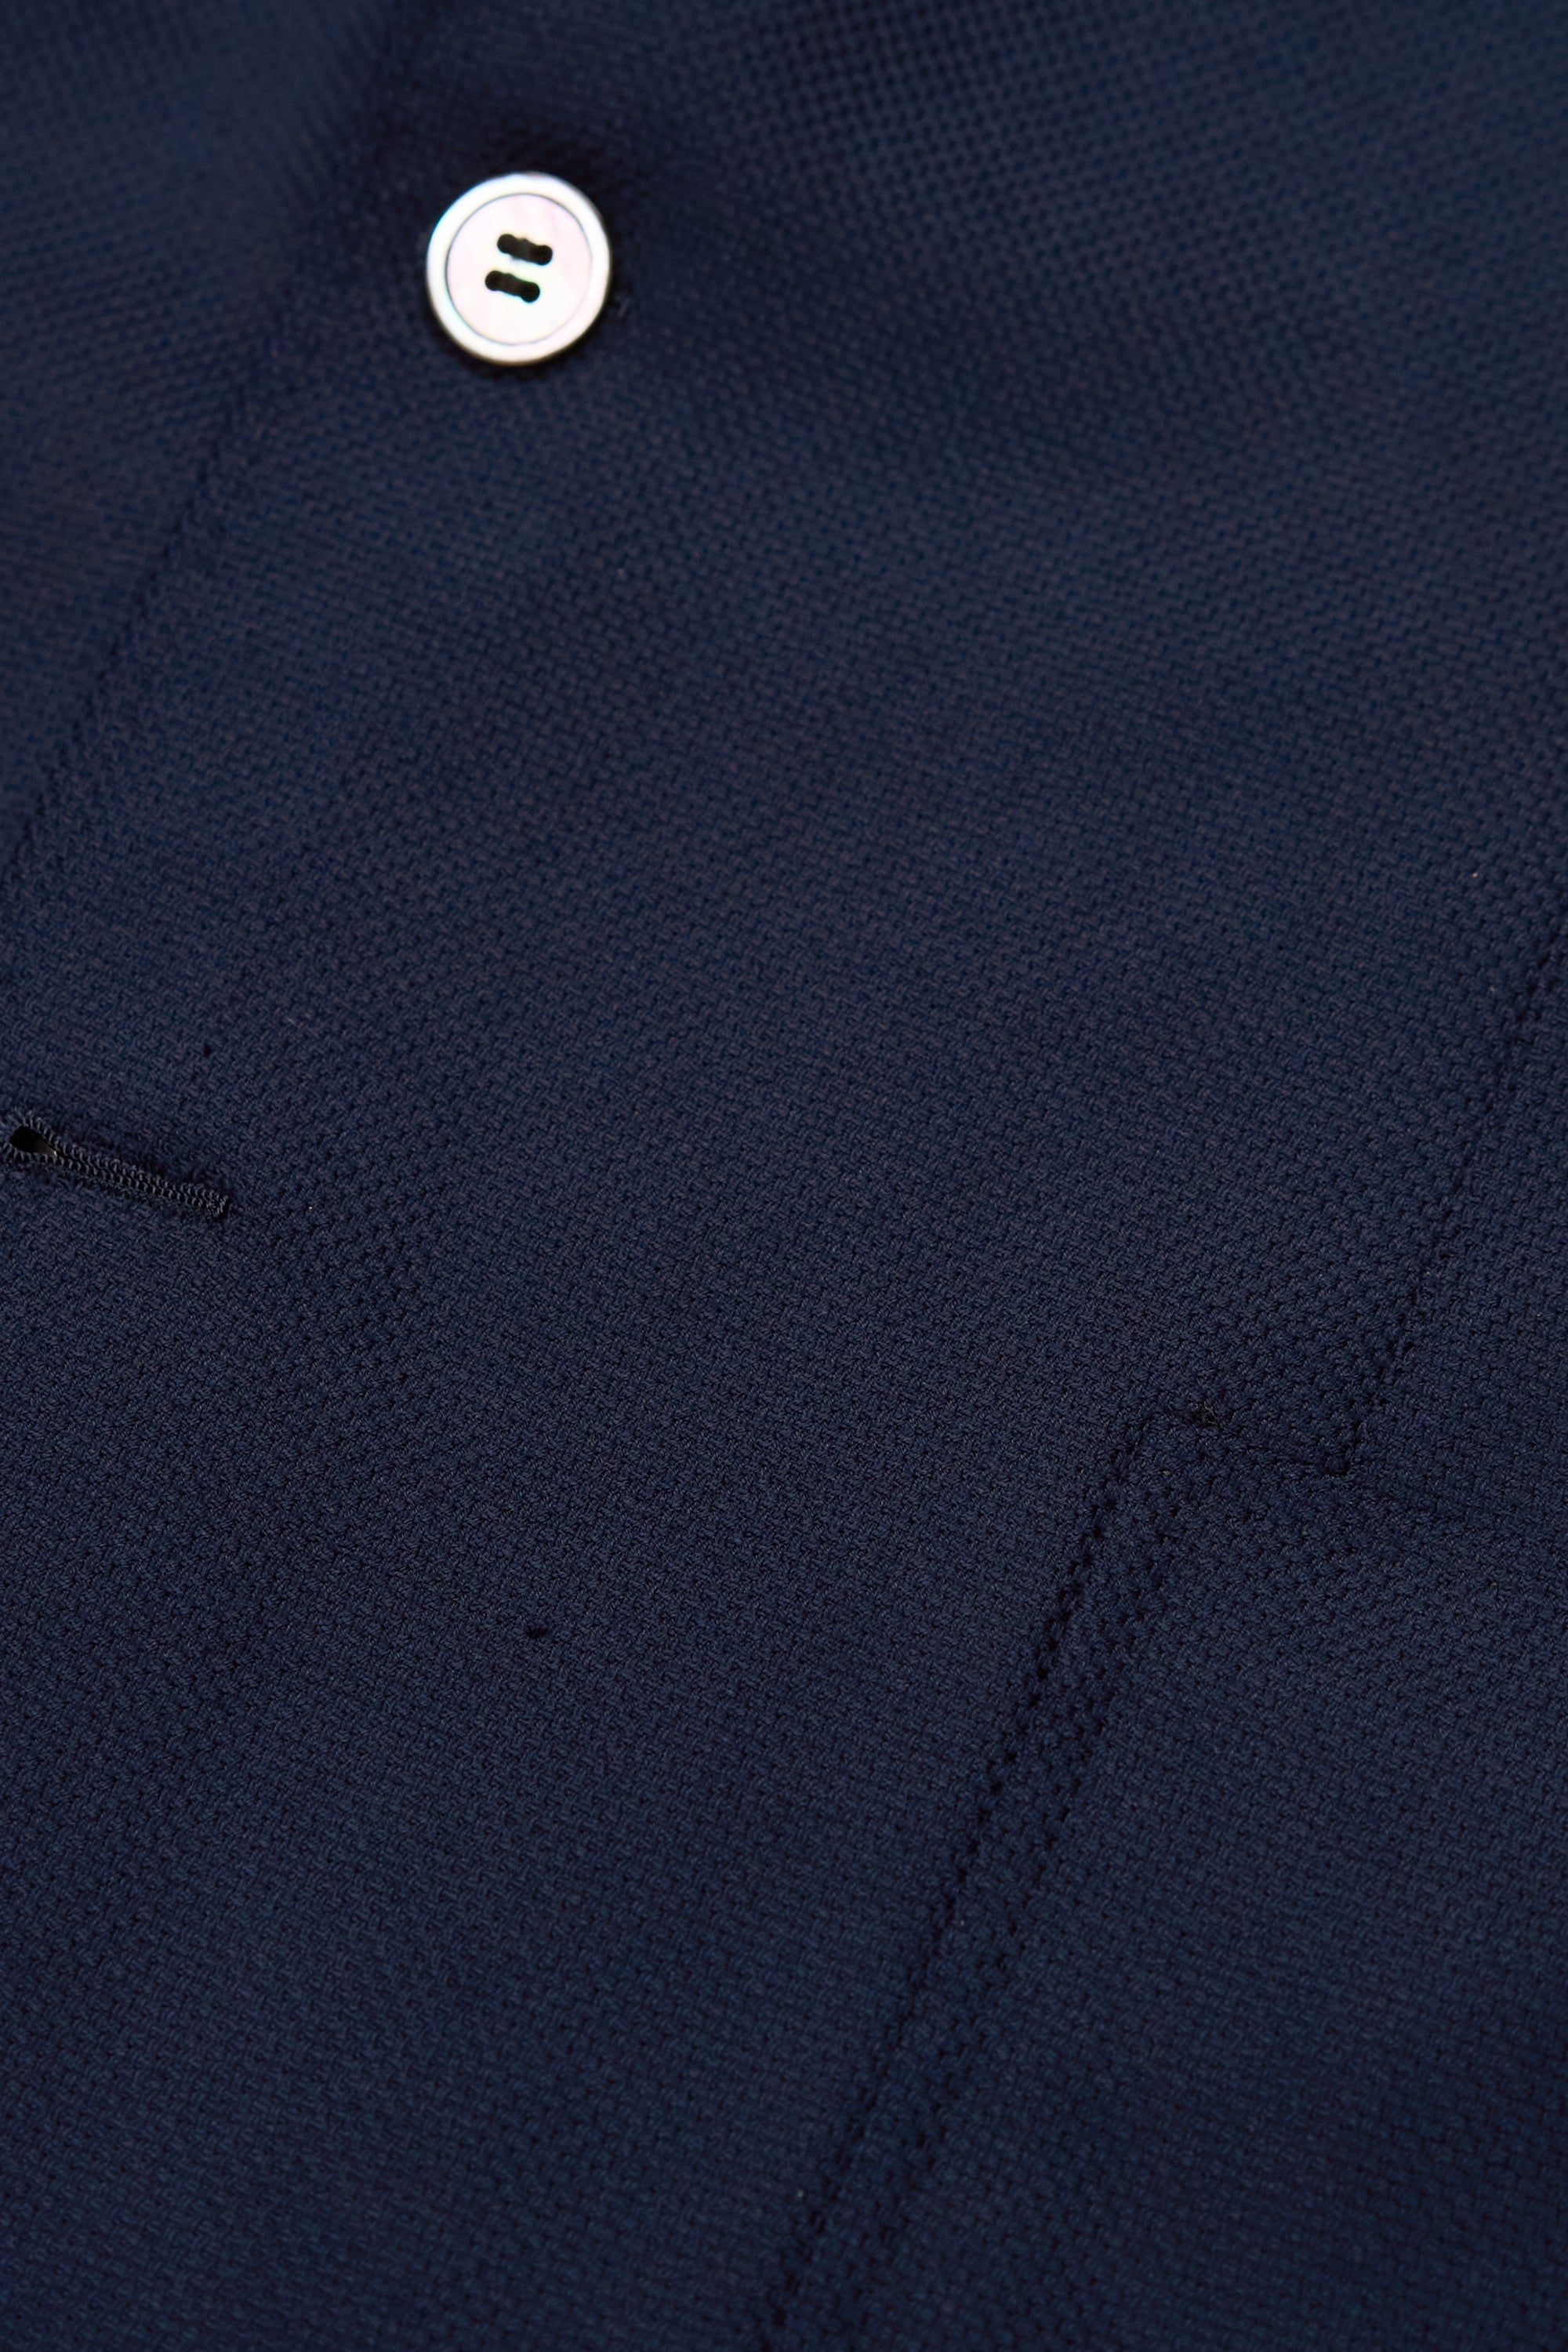 Ring Jacket Meister Navy Wool/Cashmere Sport Coat